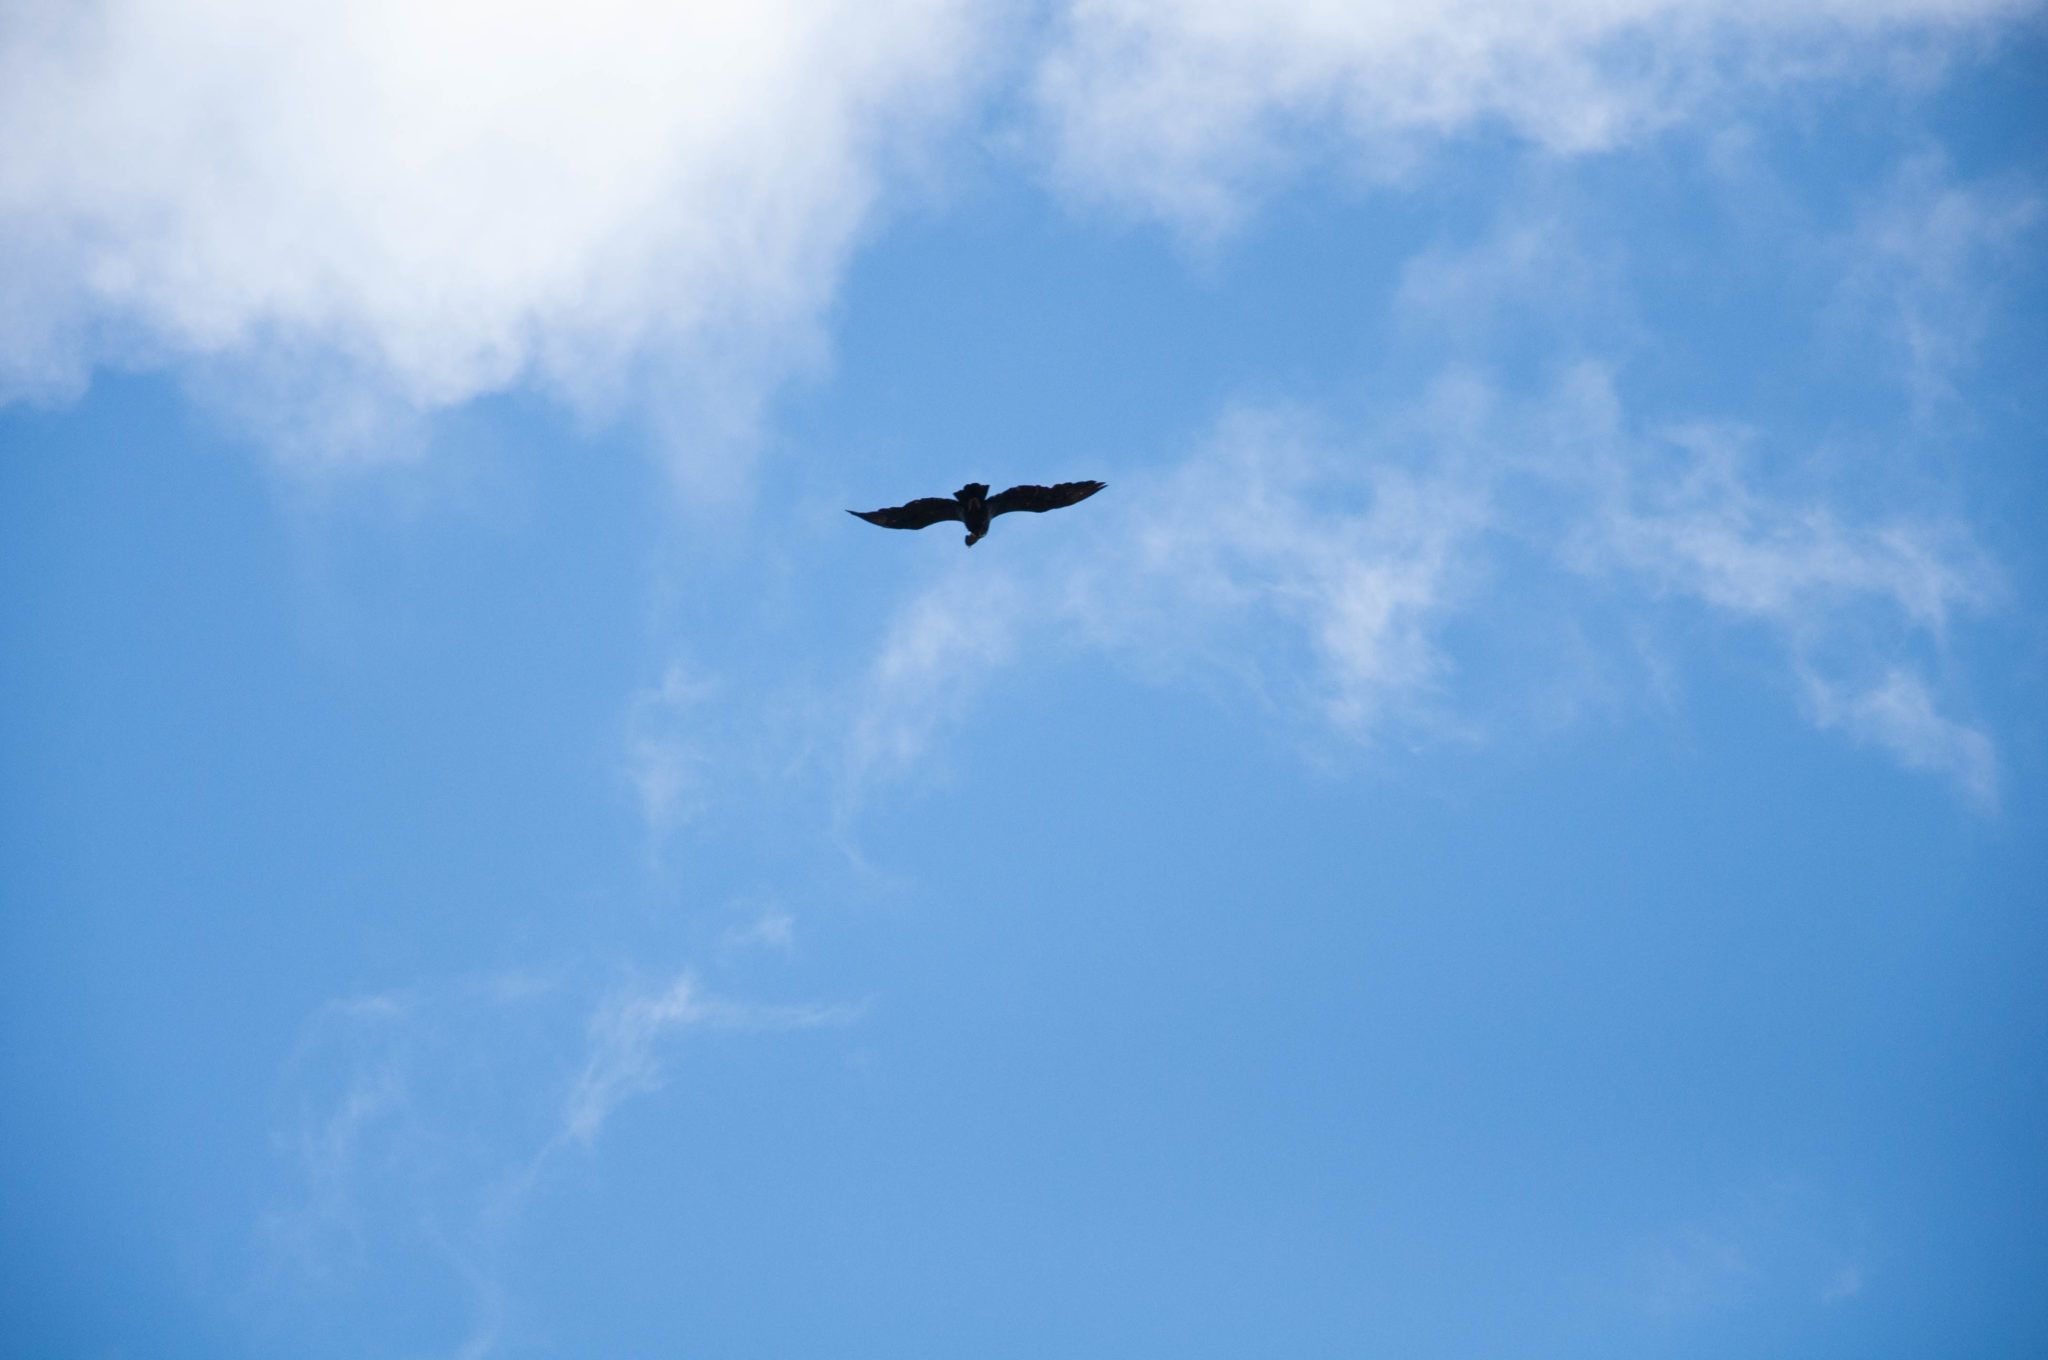 An Andean condor riding the thermals in the sky